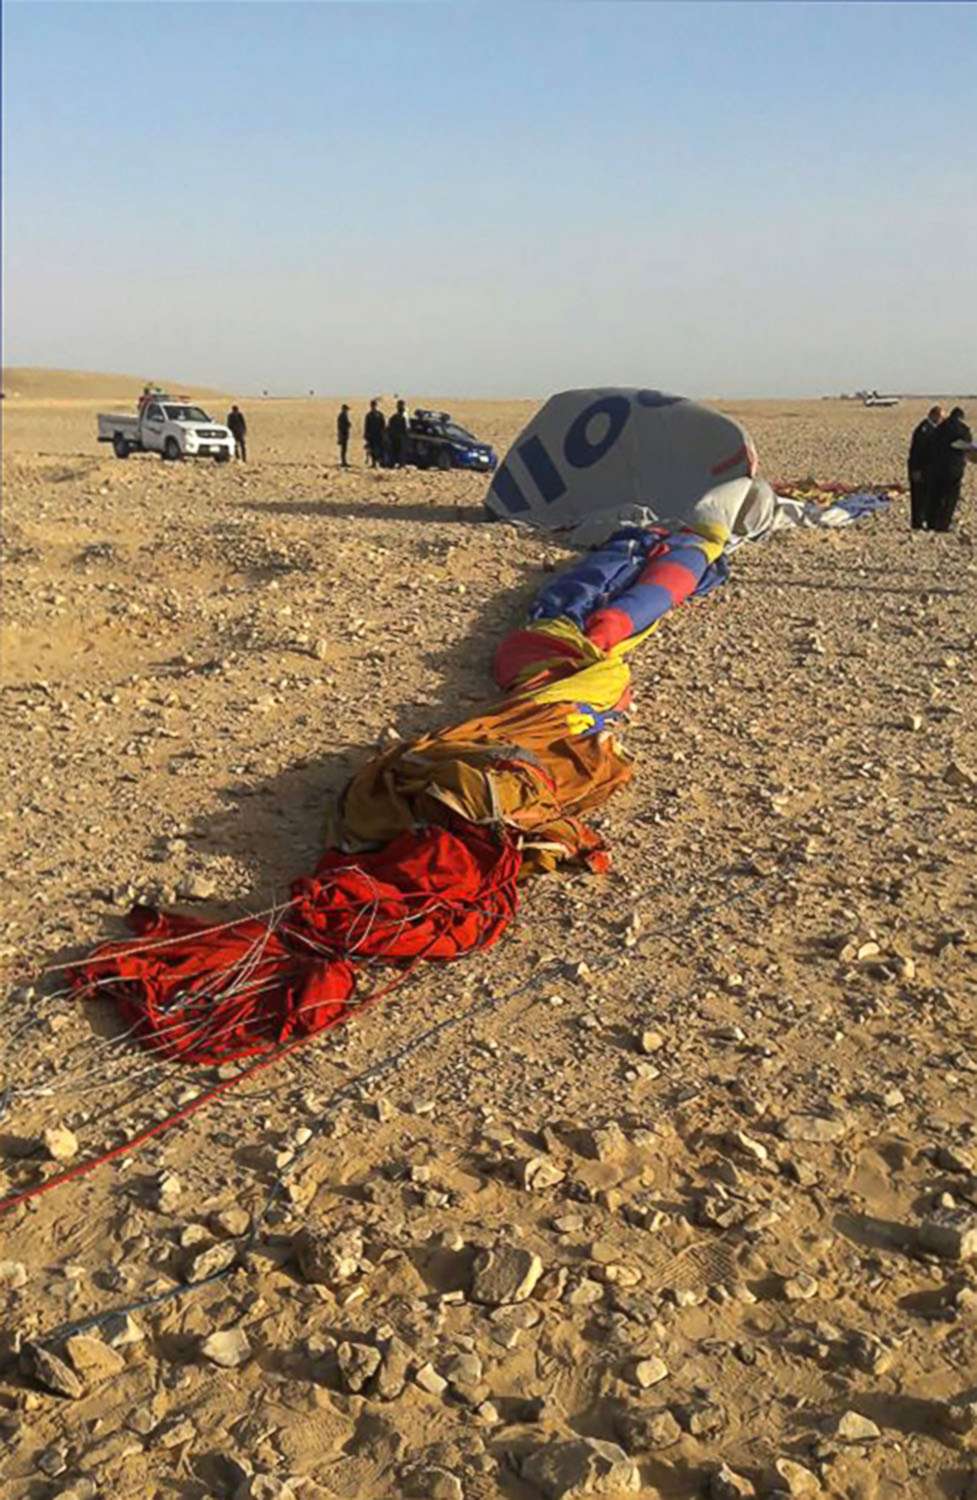 PHOTO: The remains of a hot air balloon near the ancient city of Luxor after a fatal crash on Jan. 5, 2018.